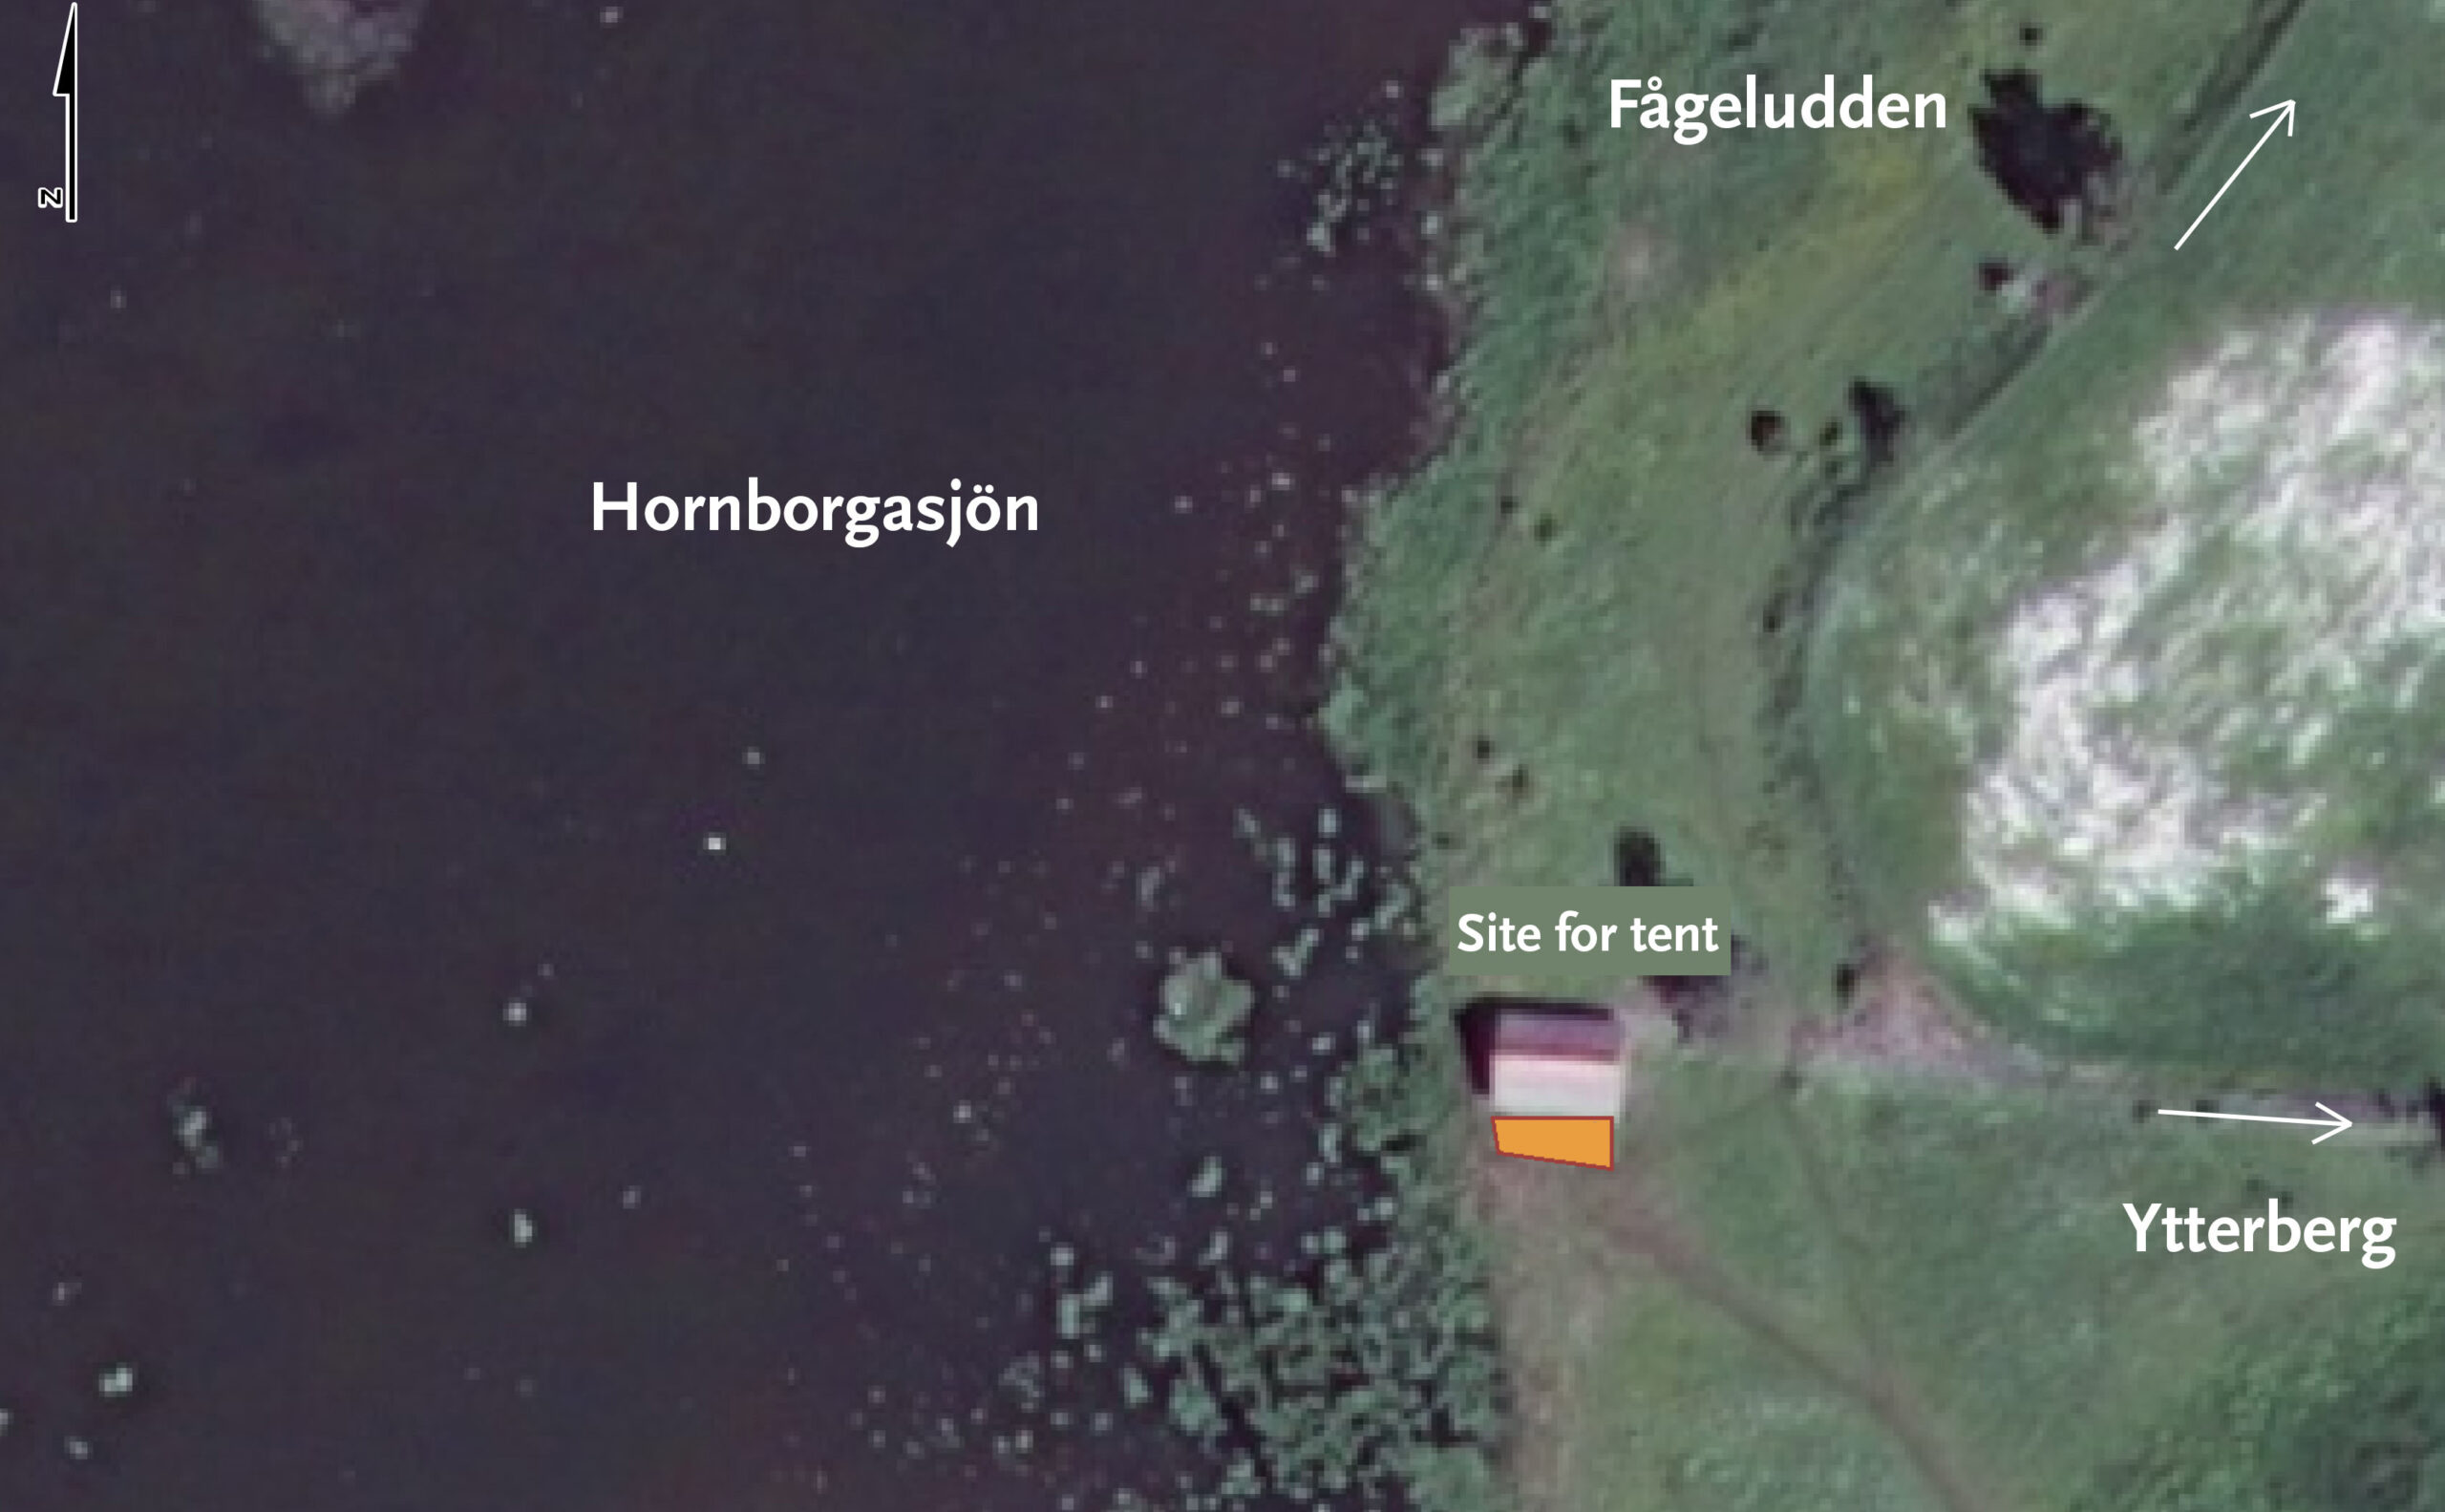 Map over the site for tent at Ängsladan. Illustration.